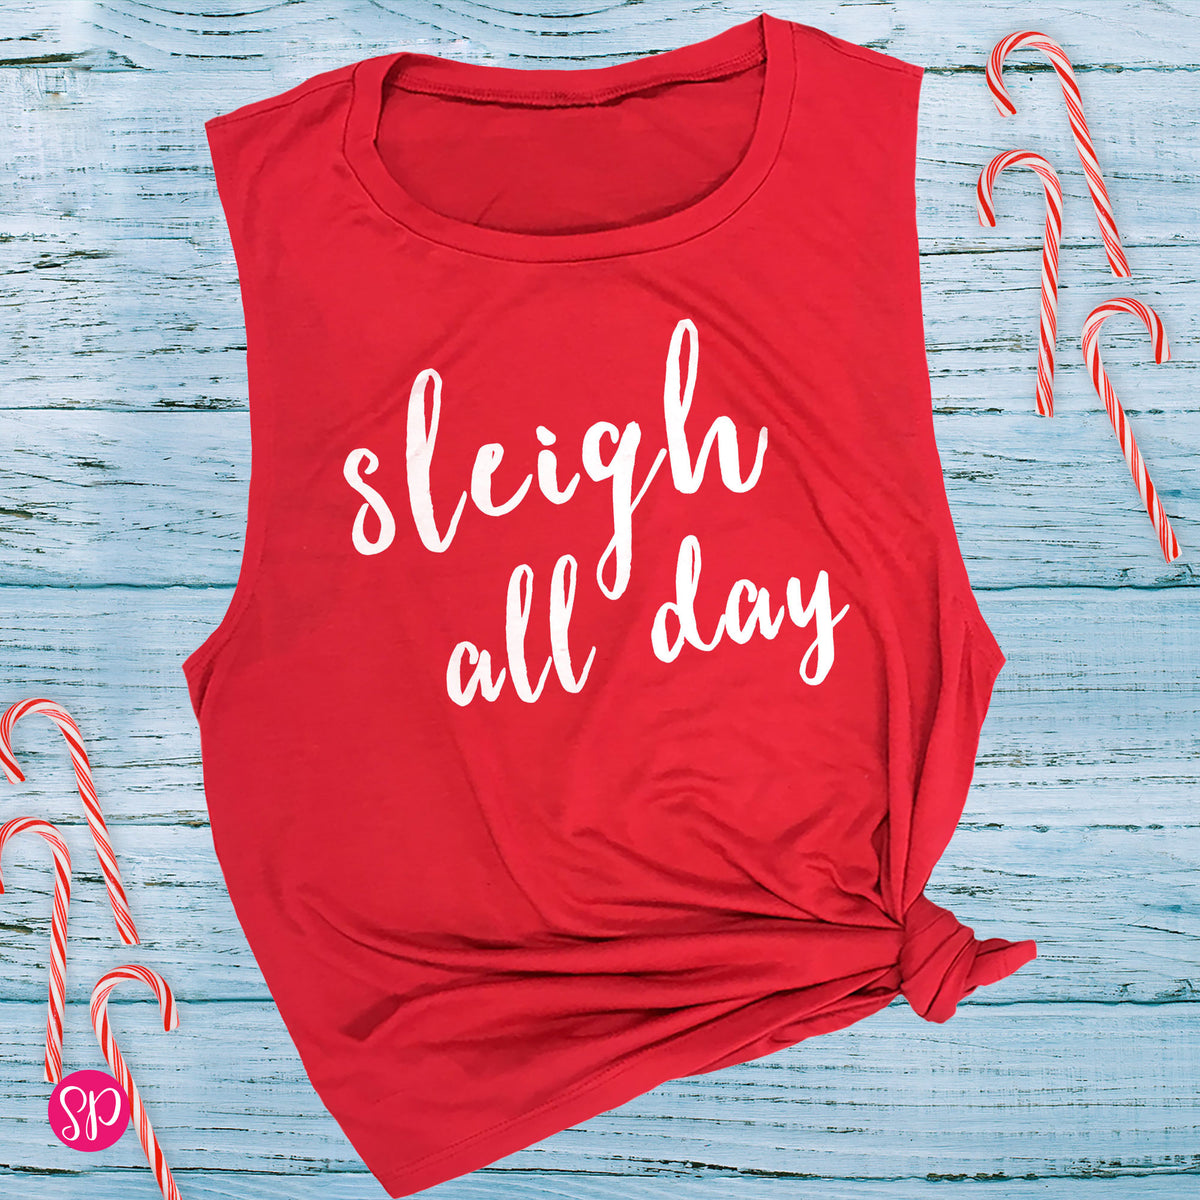 Sleigh All Day Christmas Holiday Funny Fitness Workout Muscle Tank Tee Shirt